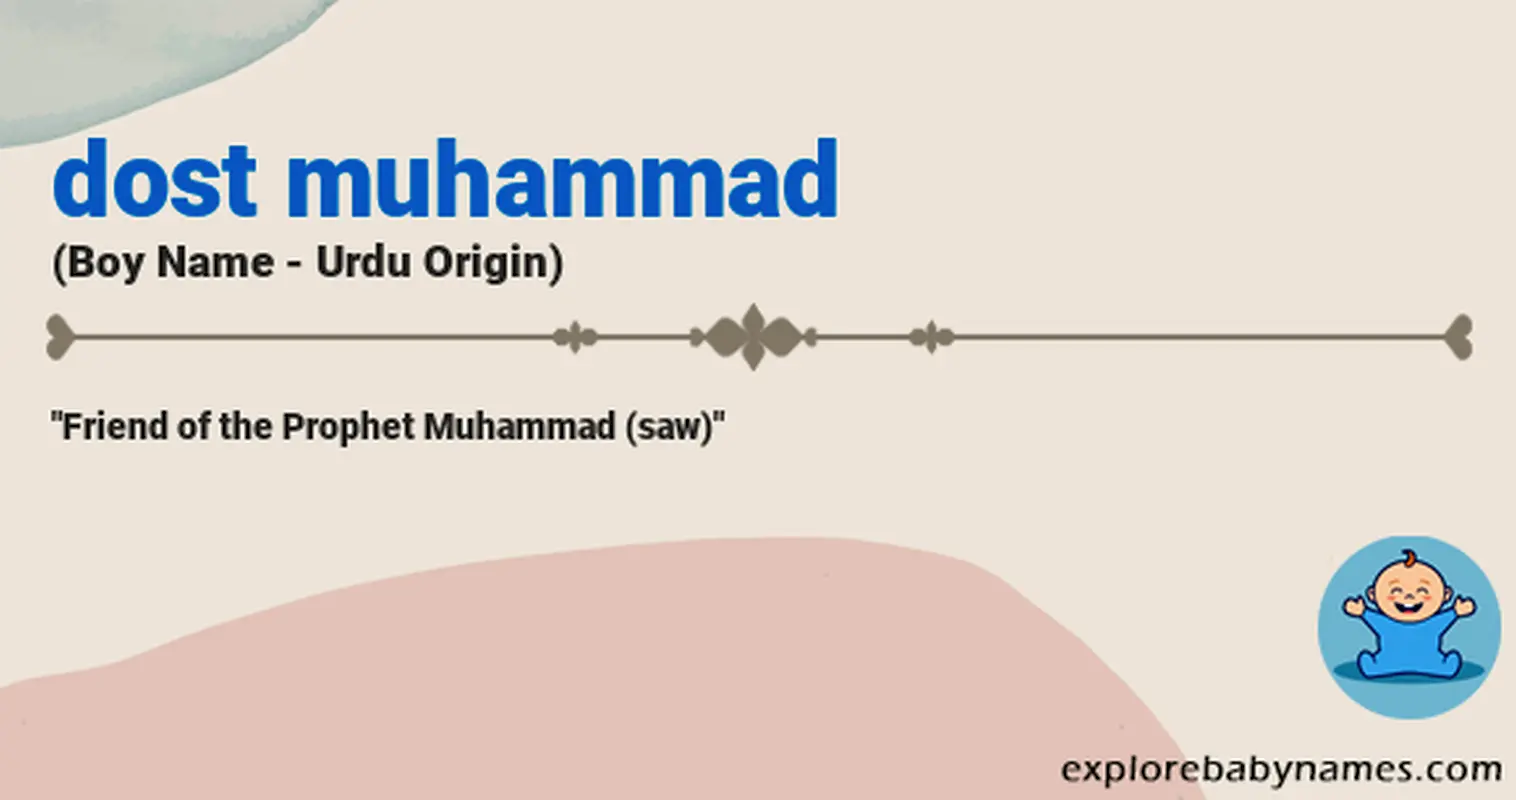 Meaning of Dost muhammad